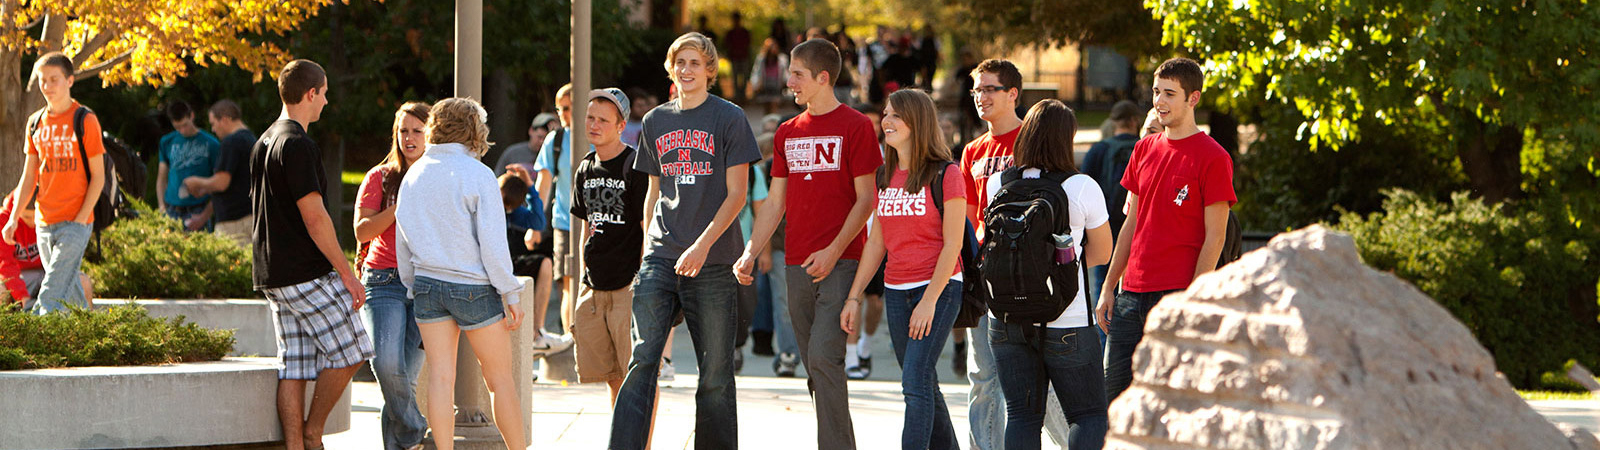 Students at fountain